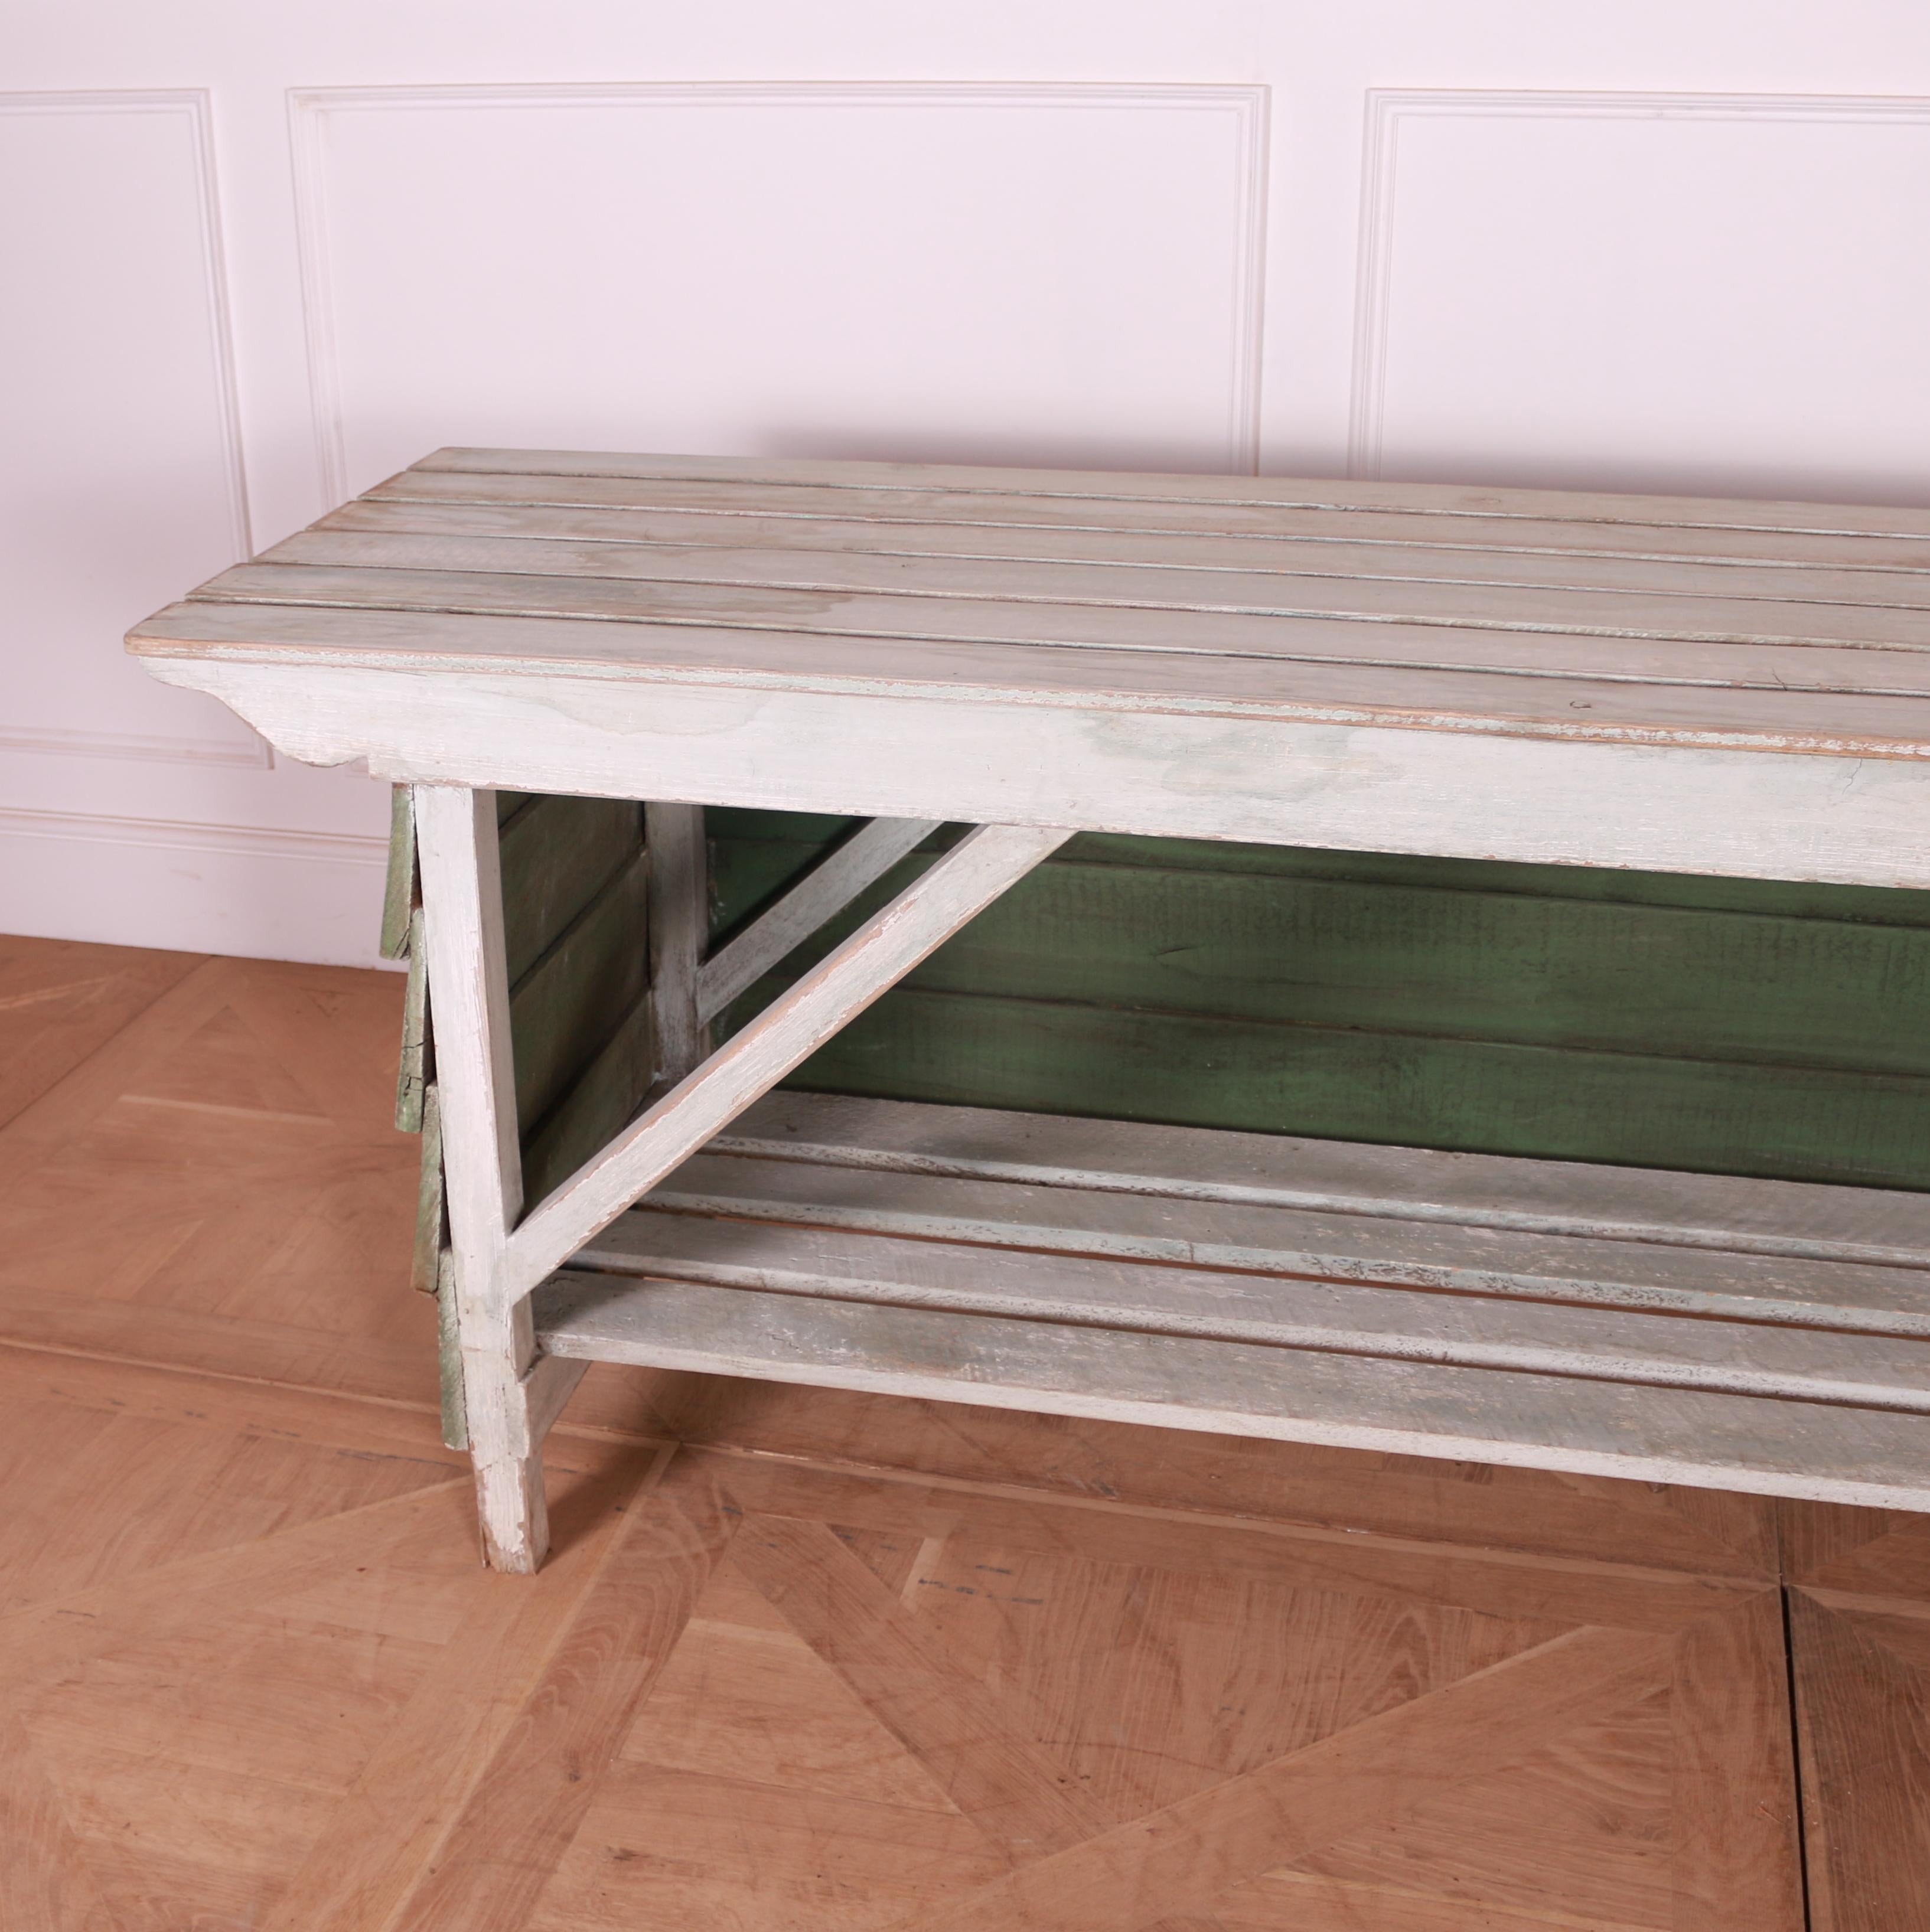 Custom made painted pine potting table. Can be made with drawers or as shown and can be finished to your specific size and colour.

Reference: 7614

Dimensions
81.5 inches (207 cms) Wide
24 inches (61 cms) Deep
31 inches (79 cms) High